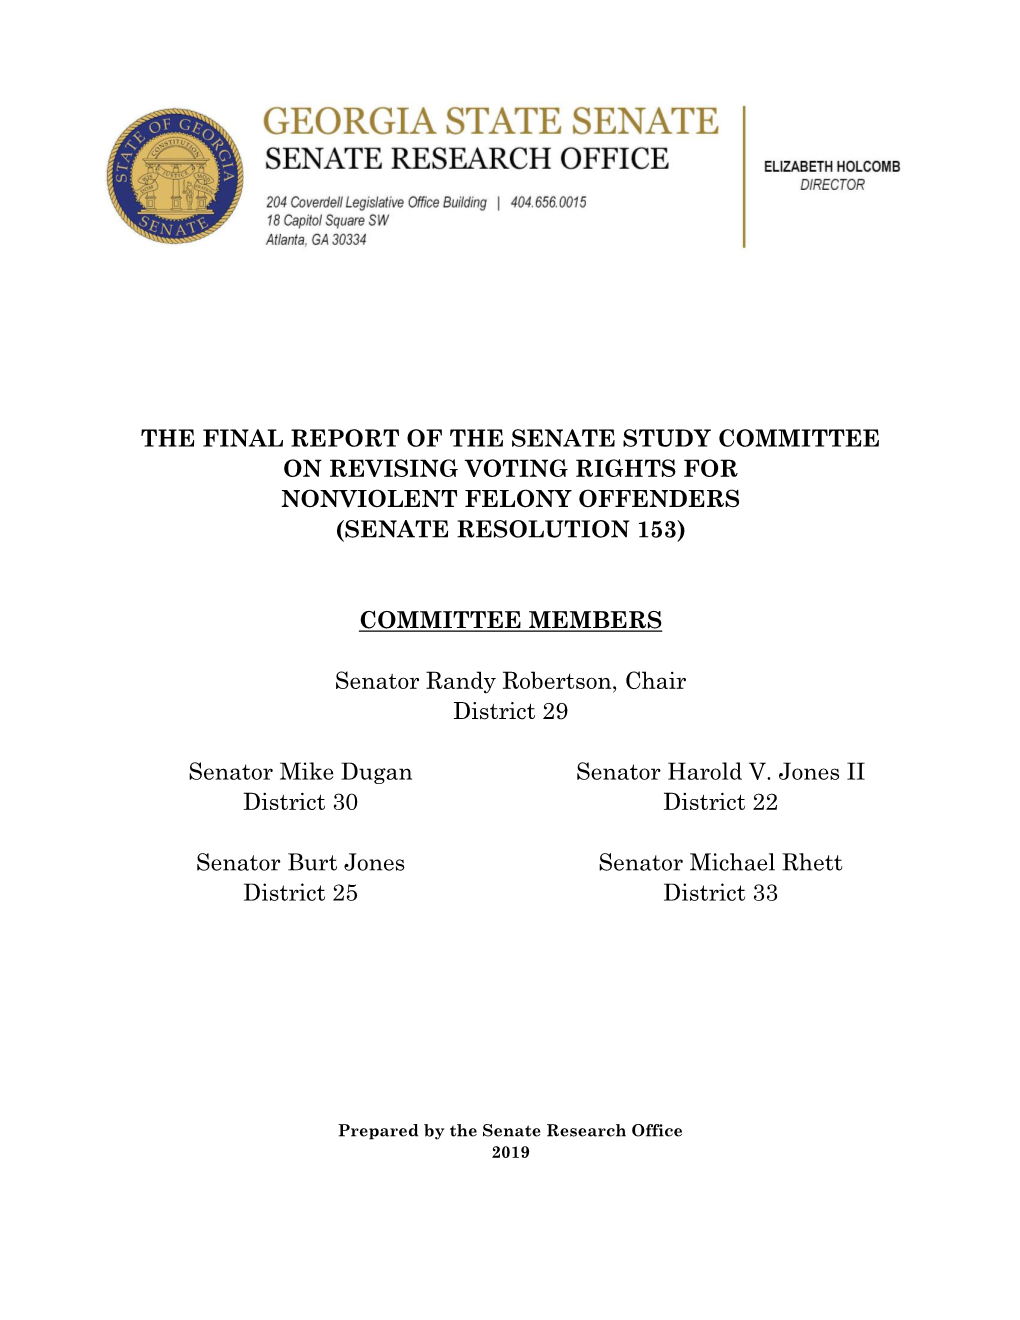 The Final Report of the Senate Study Committee on Revising Voting Rights for Nonviolent Felony Offenders (Senate Resolution 153)